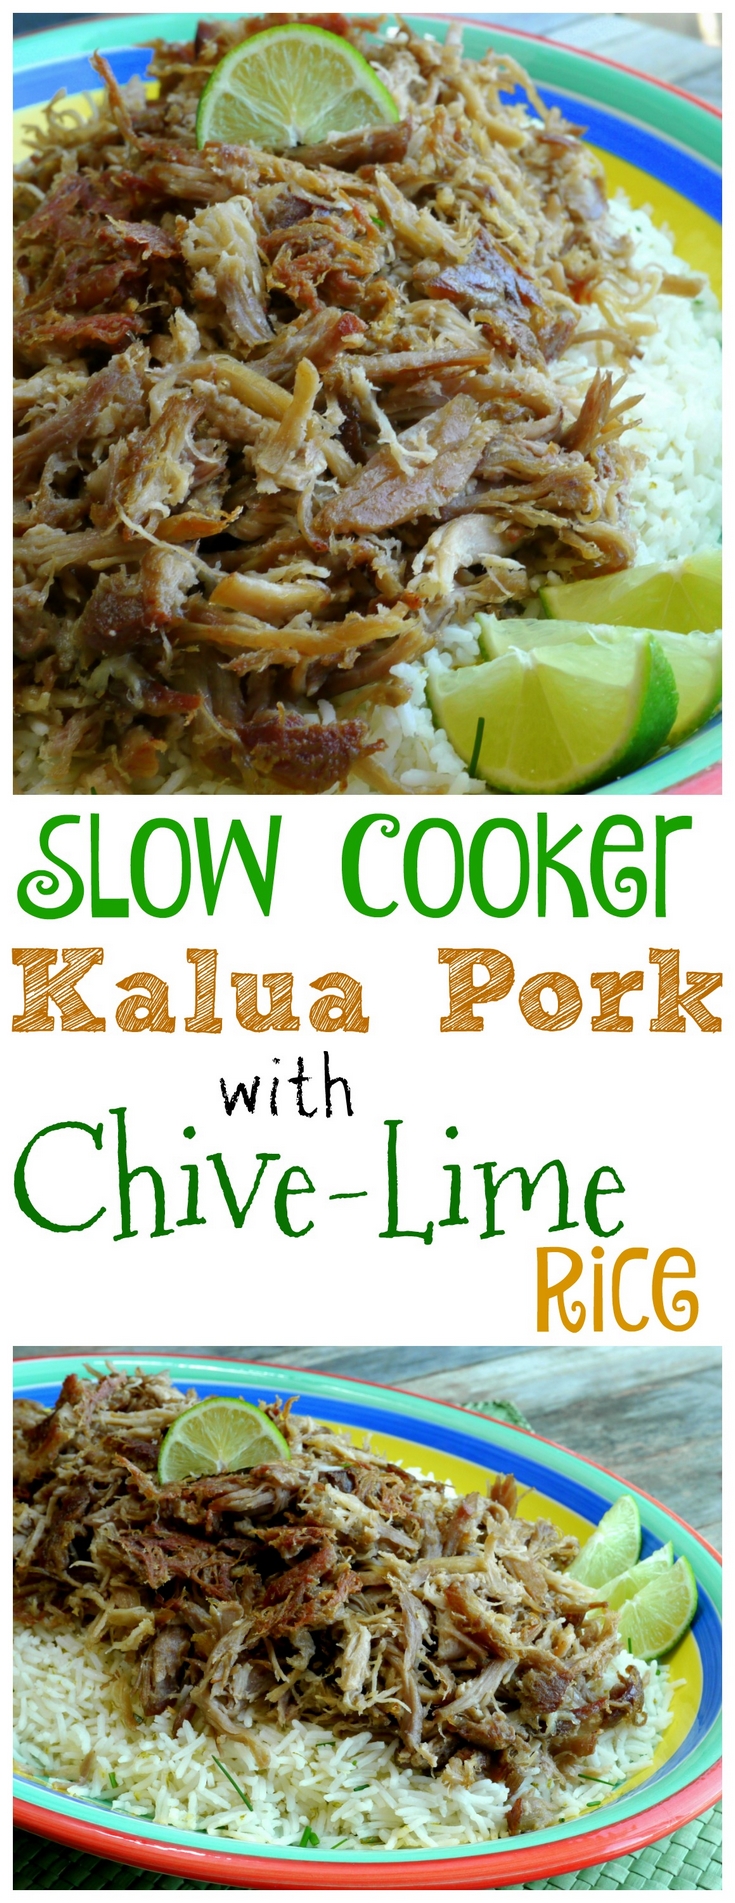 VIDEO + Recipe for Slow Cooker Kalua Pork with Chive-Lime Rice. It will rival any Kalua Pork you might find at a luau this summer from NoblePig.com. via @cmpollak1